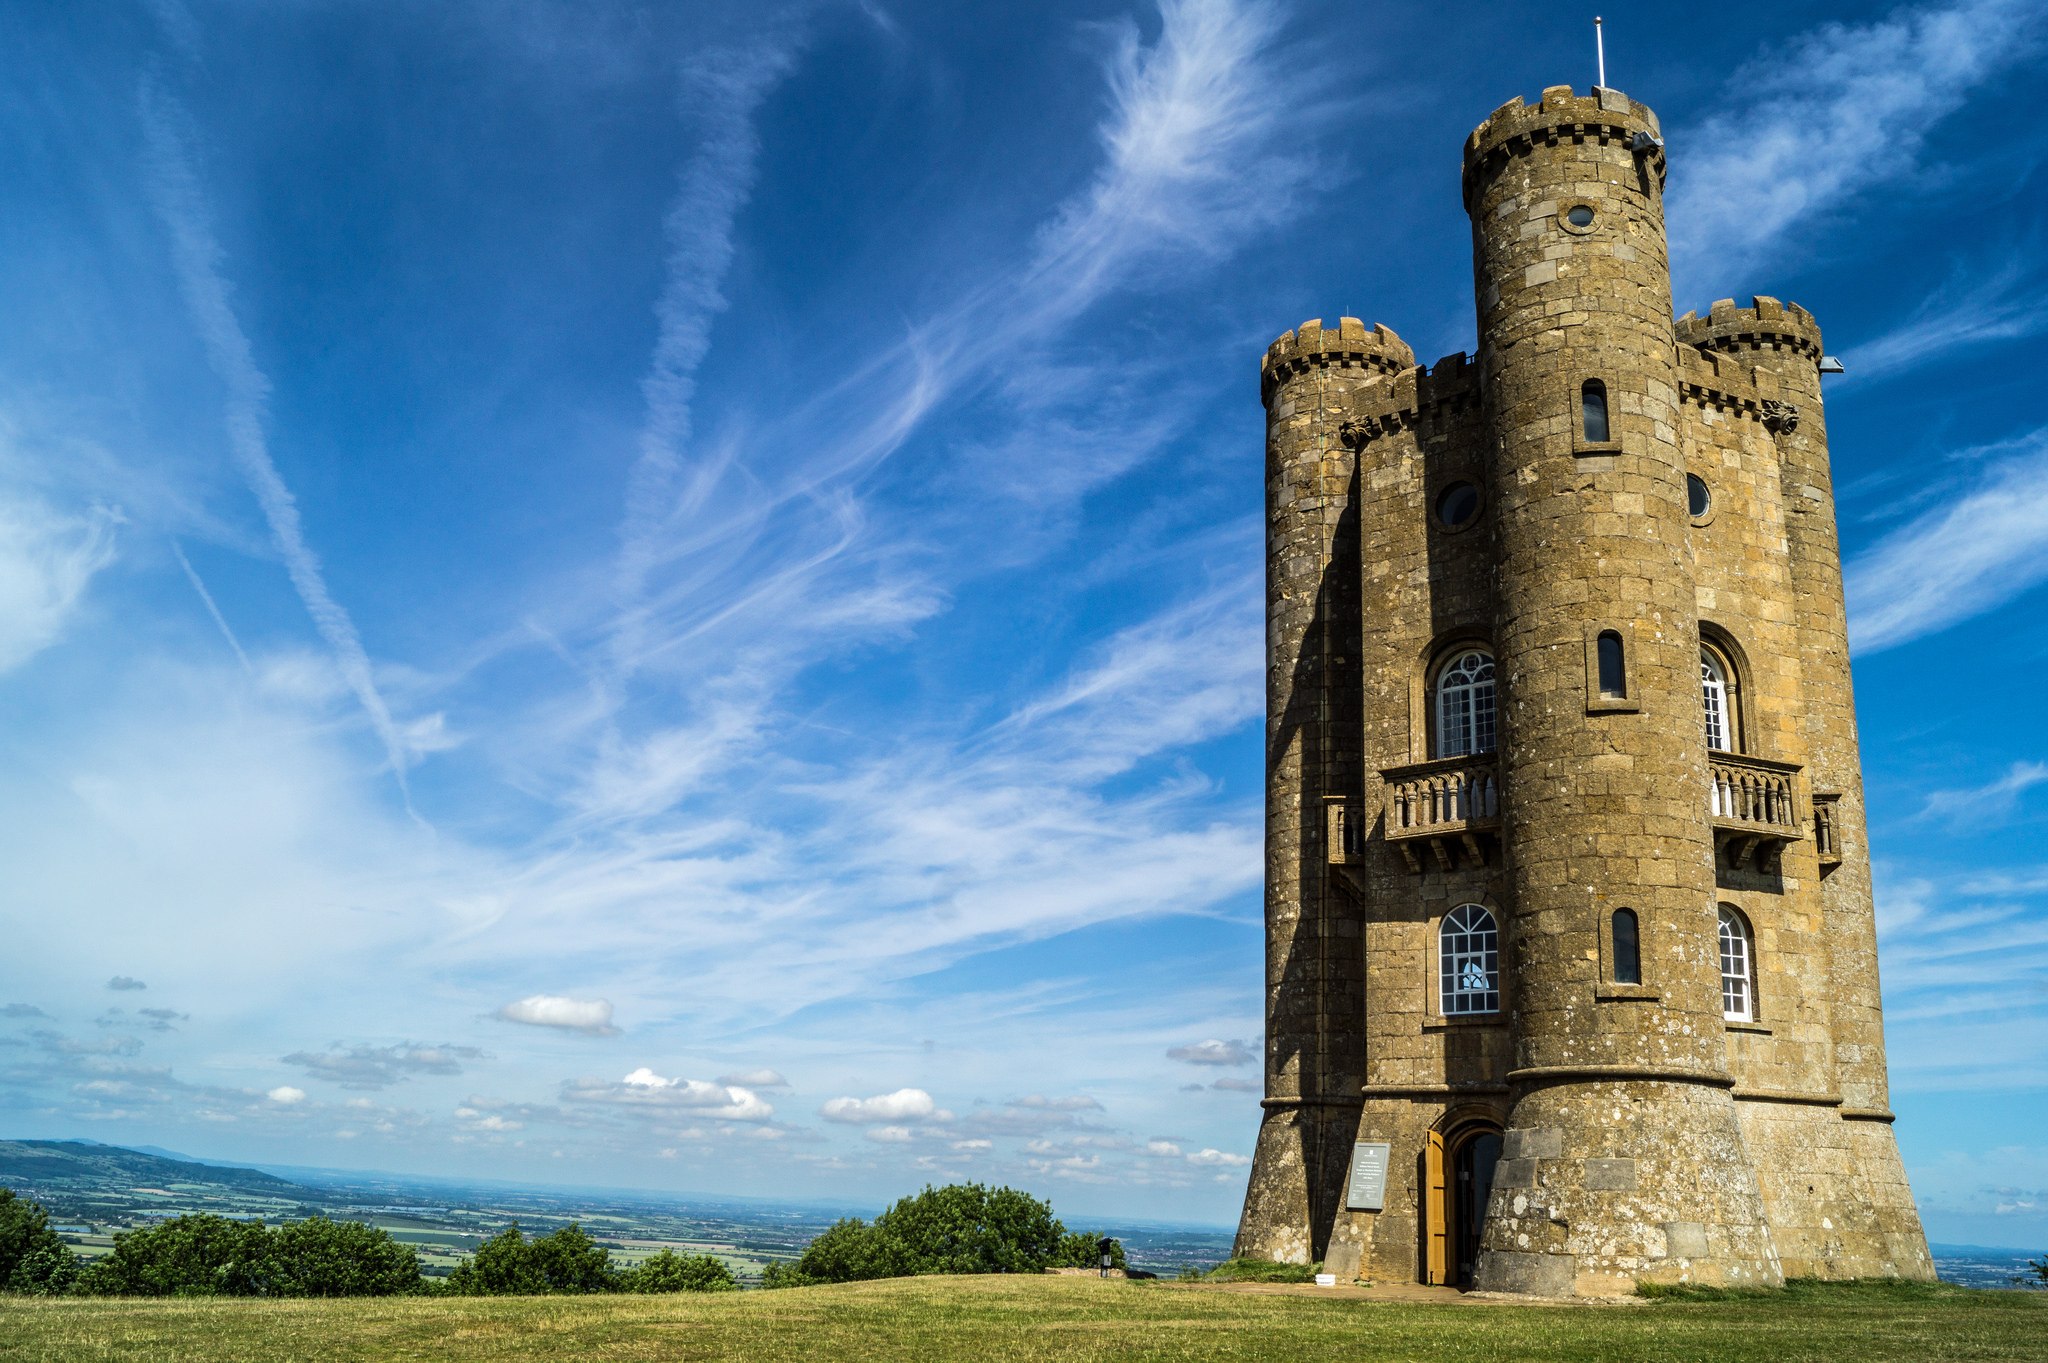 Broadway Tower Worcestershire Tourism Wallpaper 